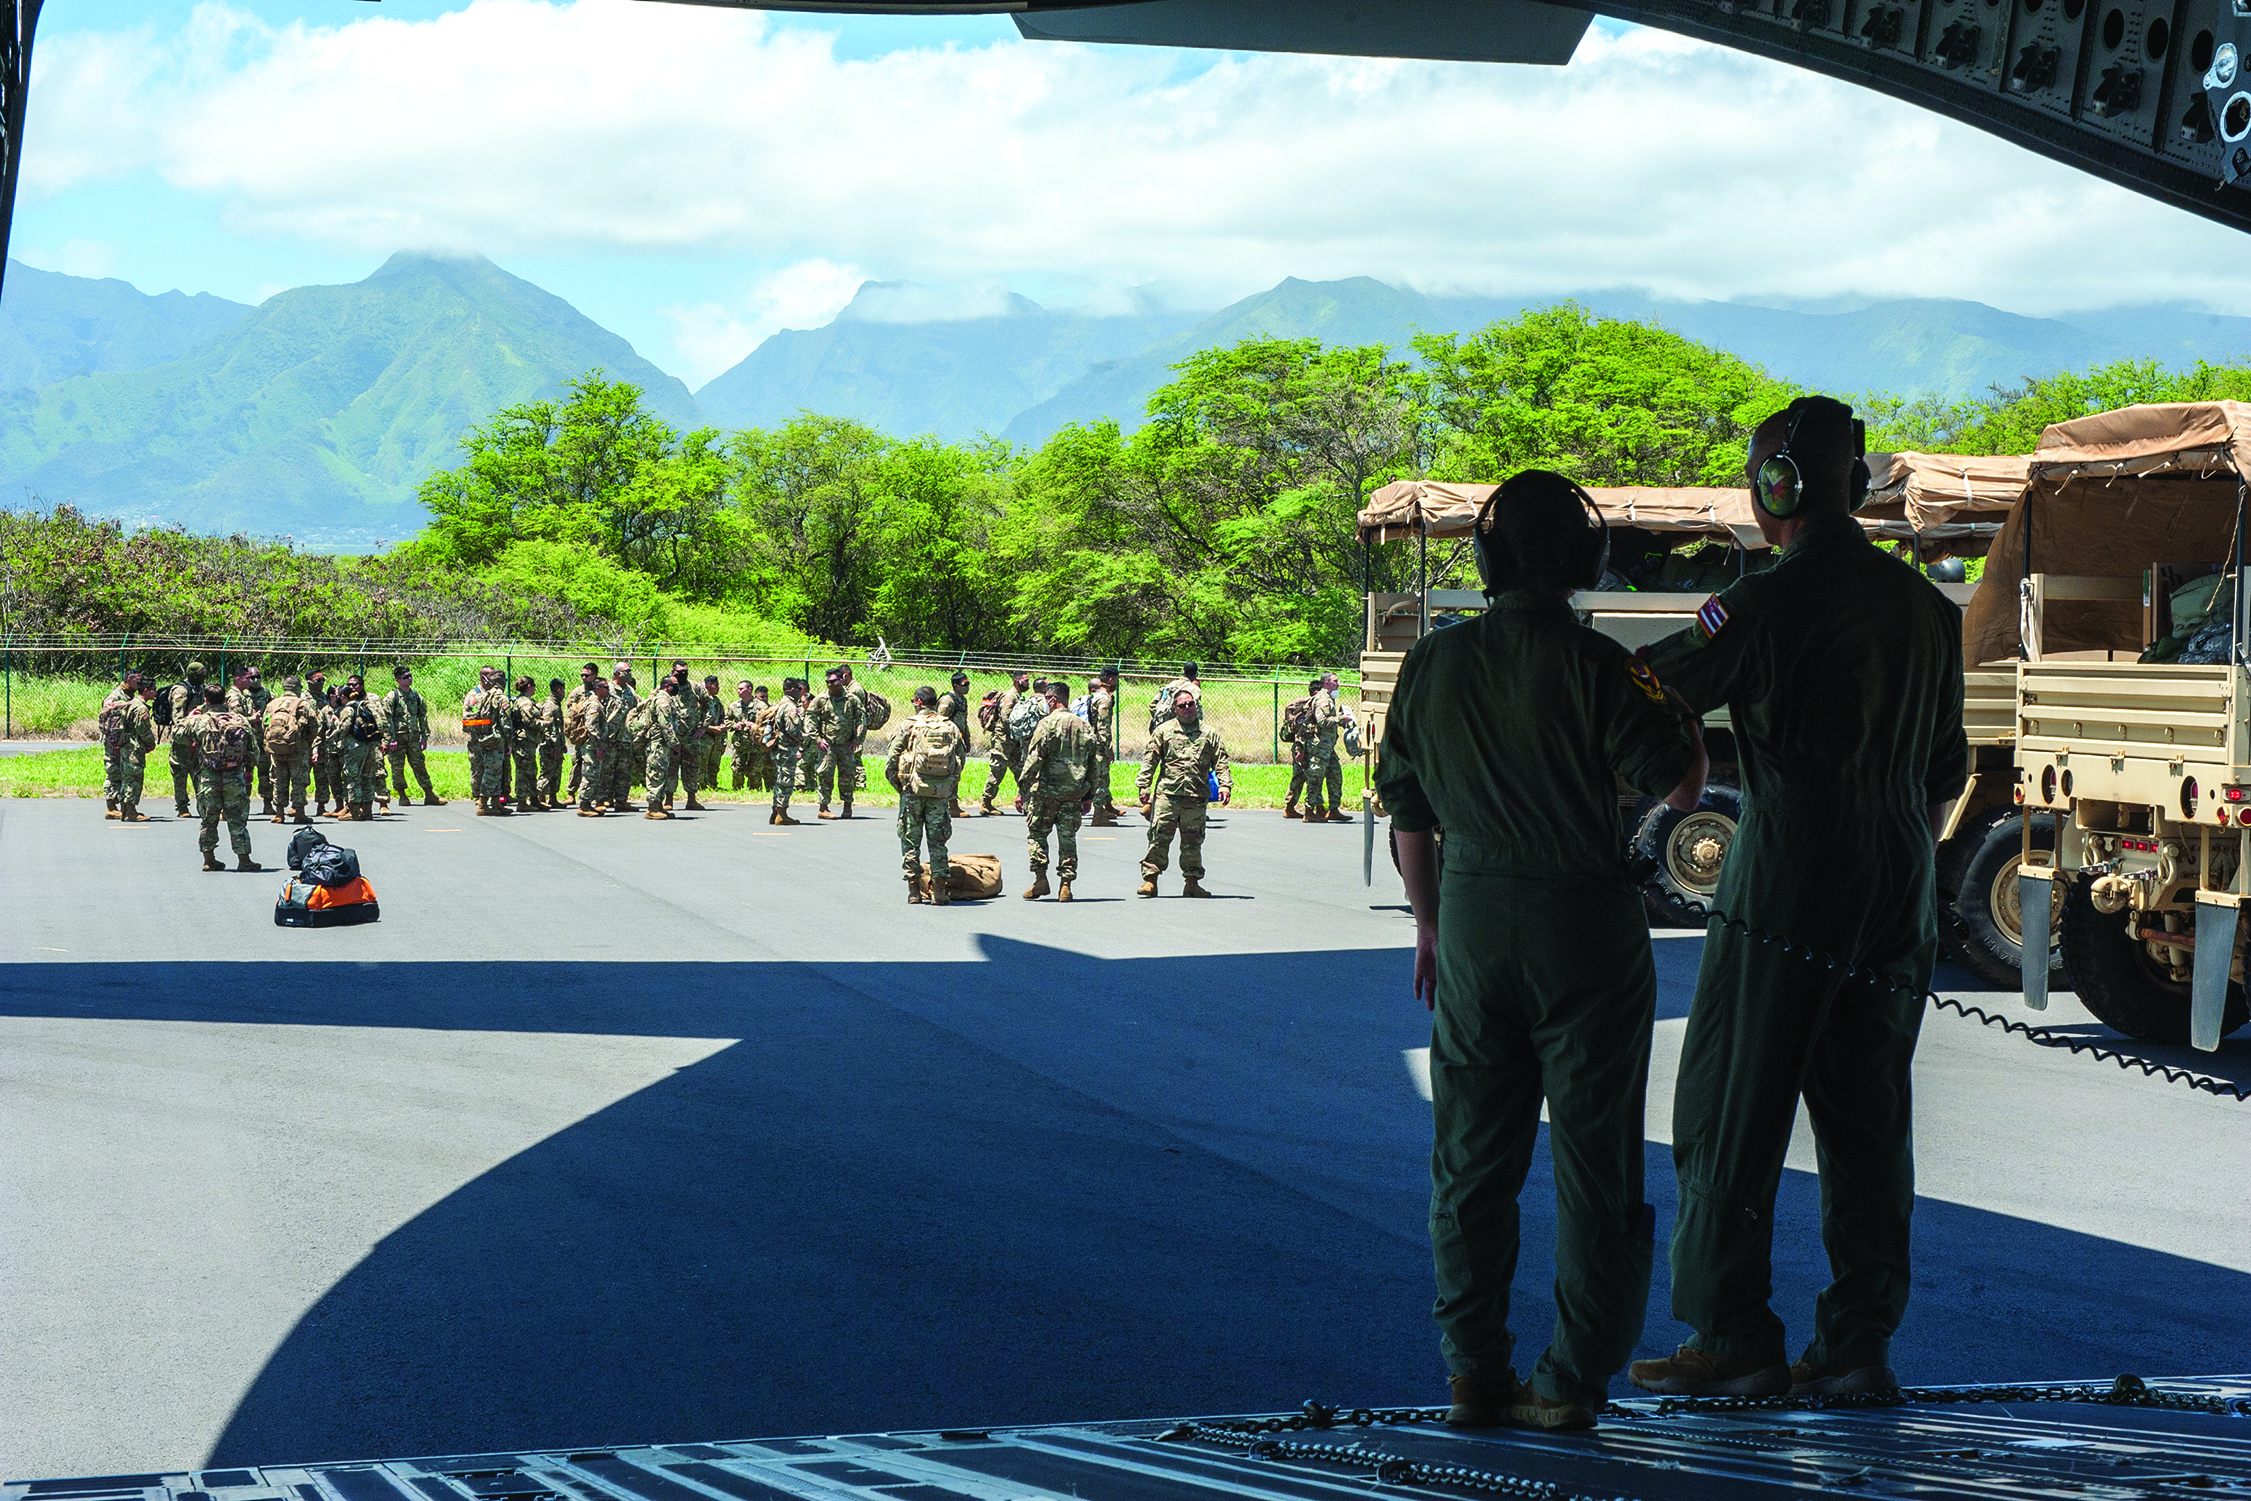 Staff Sgt. Virginia Inouye and Master Sgt. Brandon
        Sarceda, 204th Airlift Squadron loadmasters,
        deliver Hawaii Air National Guard Airmen and
        Soldiers April 17, 2020, to Kahului Airport, Maui,
        Hawaii. Guardsmen were airlifted from Oahu
        on a C-17 Globemaster III to minimize the risk
        of exposure of disease at airports. Hundreds of
        guardsmen have been activated to assist the State
        of Hawaii’s response to COVID-19. (U.S. Air Force
        photo by Senior Airman John Linzmeier)